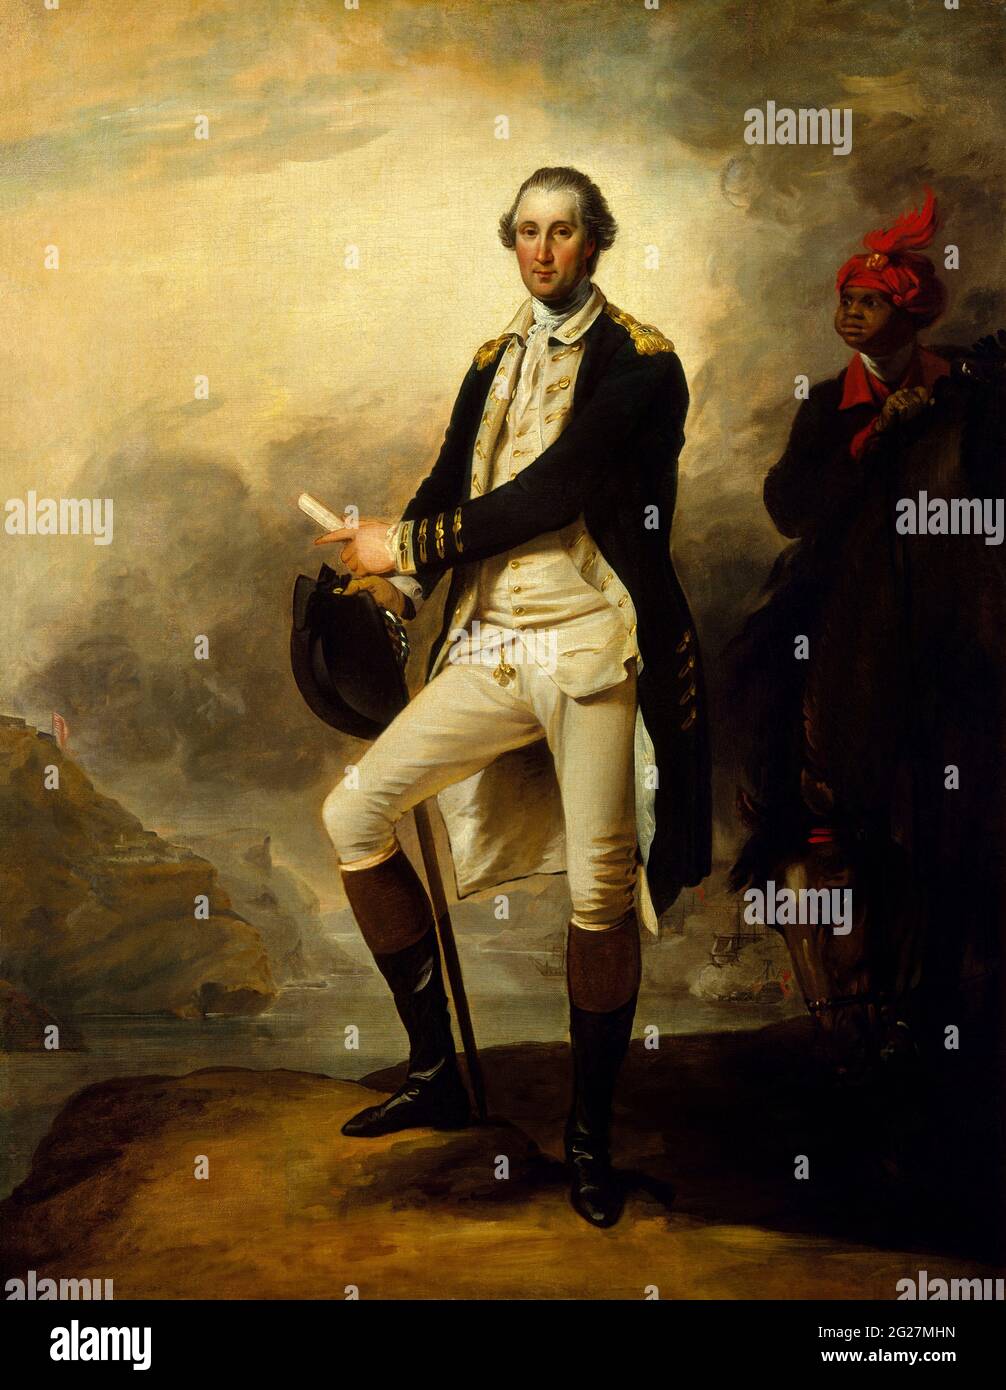 A 1780 painting of George Washington by American artist John Trumbull. Stock Photo